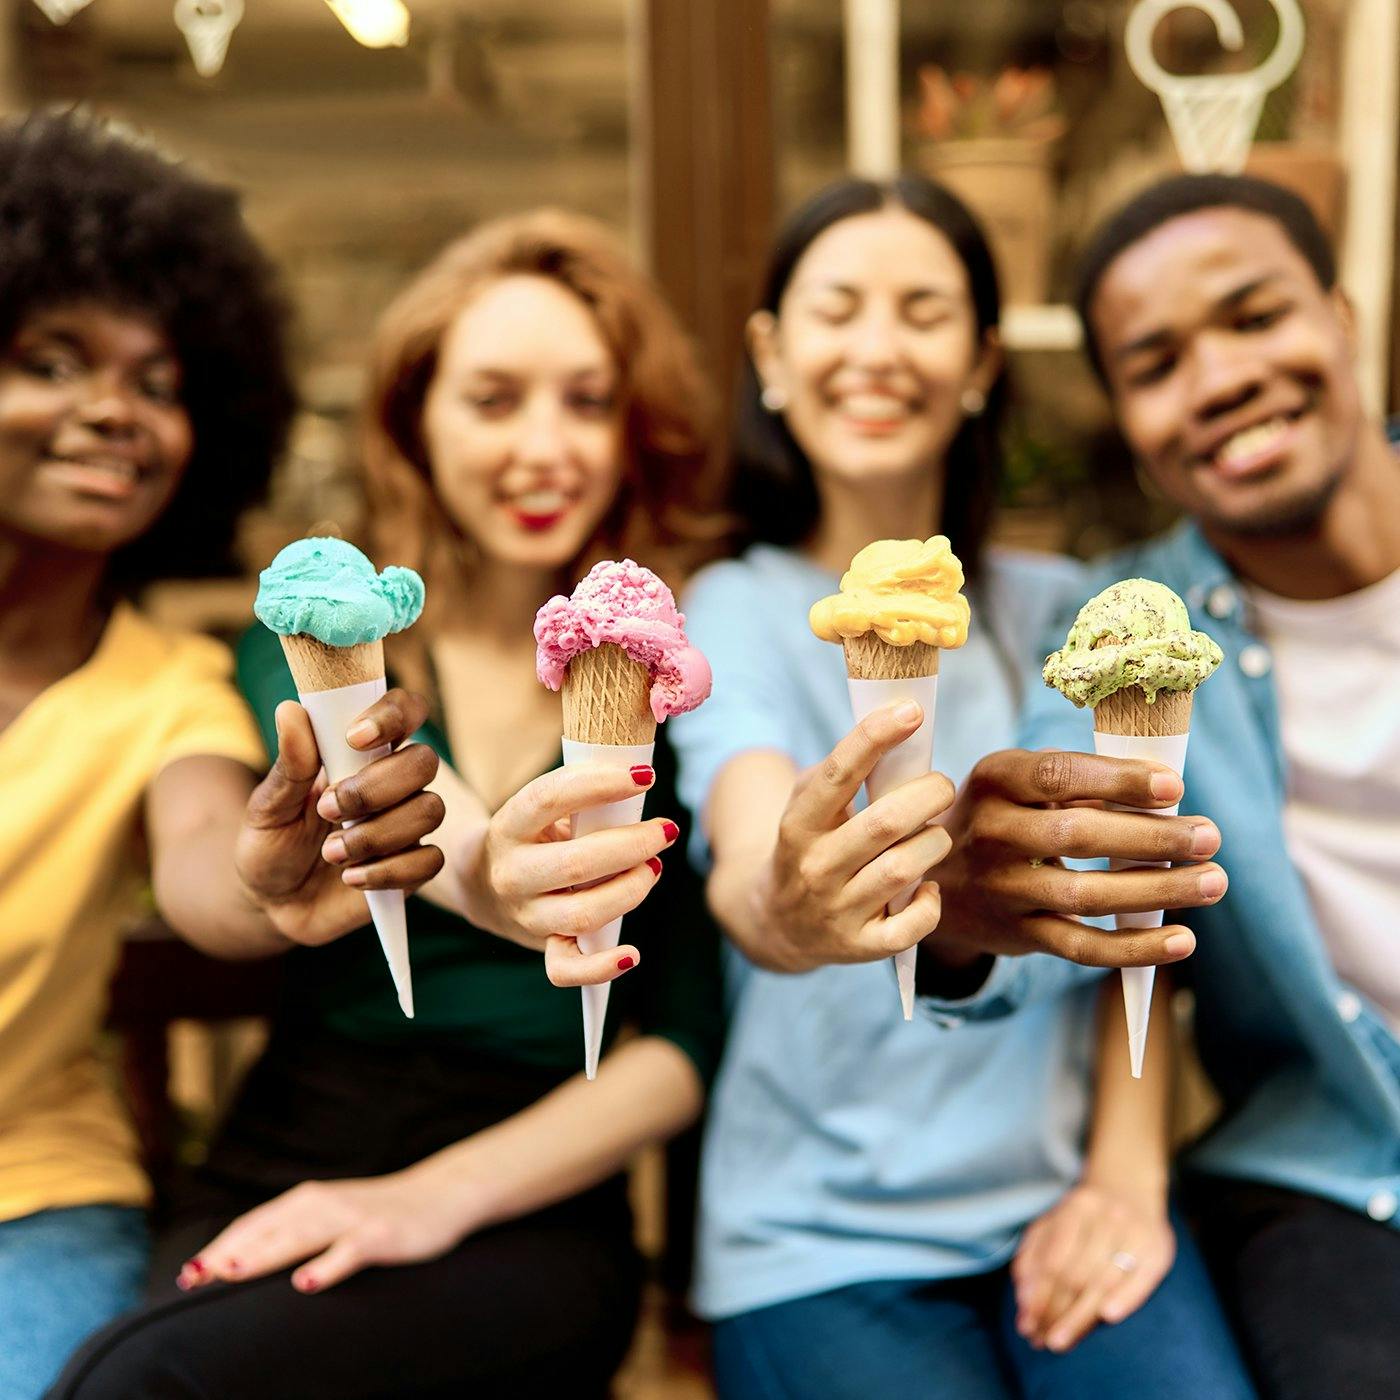 A group of friends holding ice cream cones